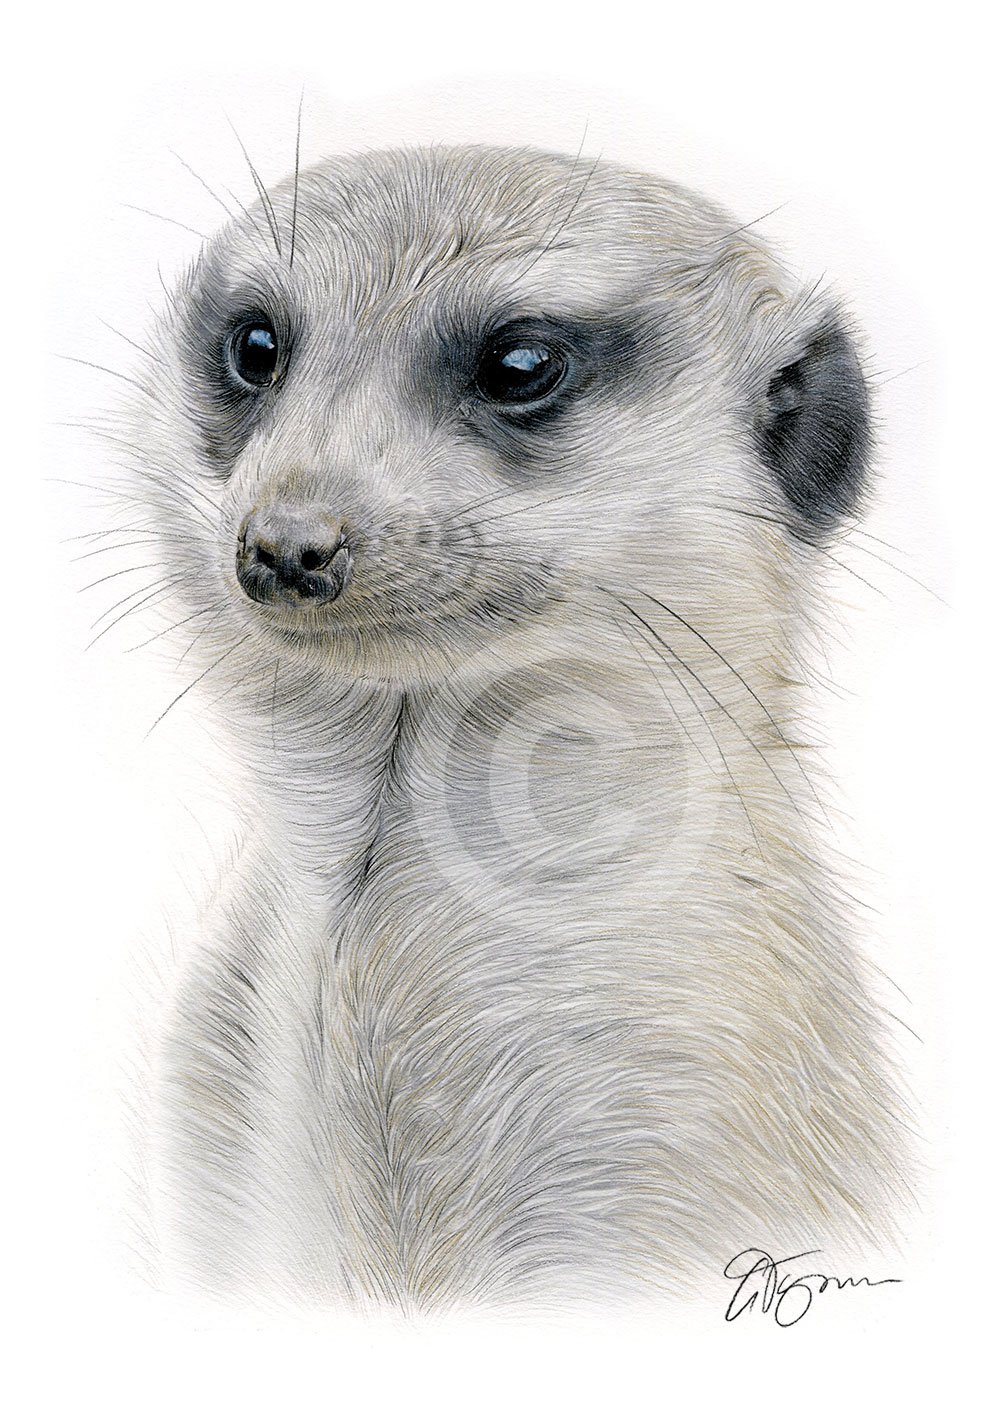 Colour pencil drawing of a meerkat by UK artist Gary Tymon